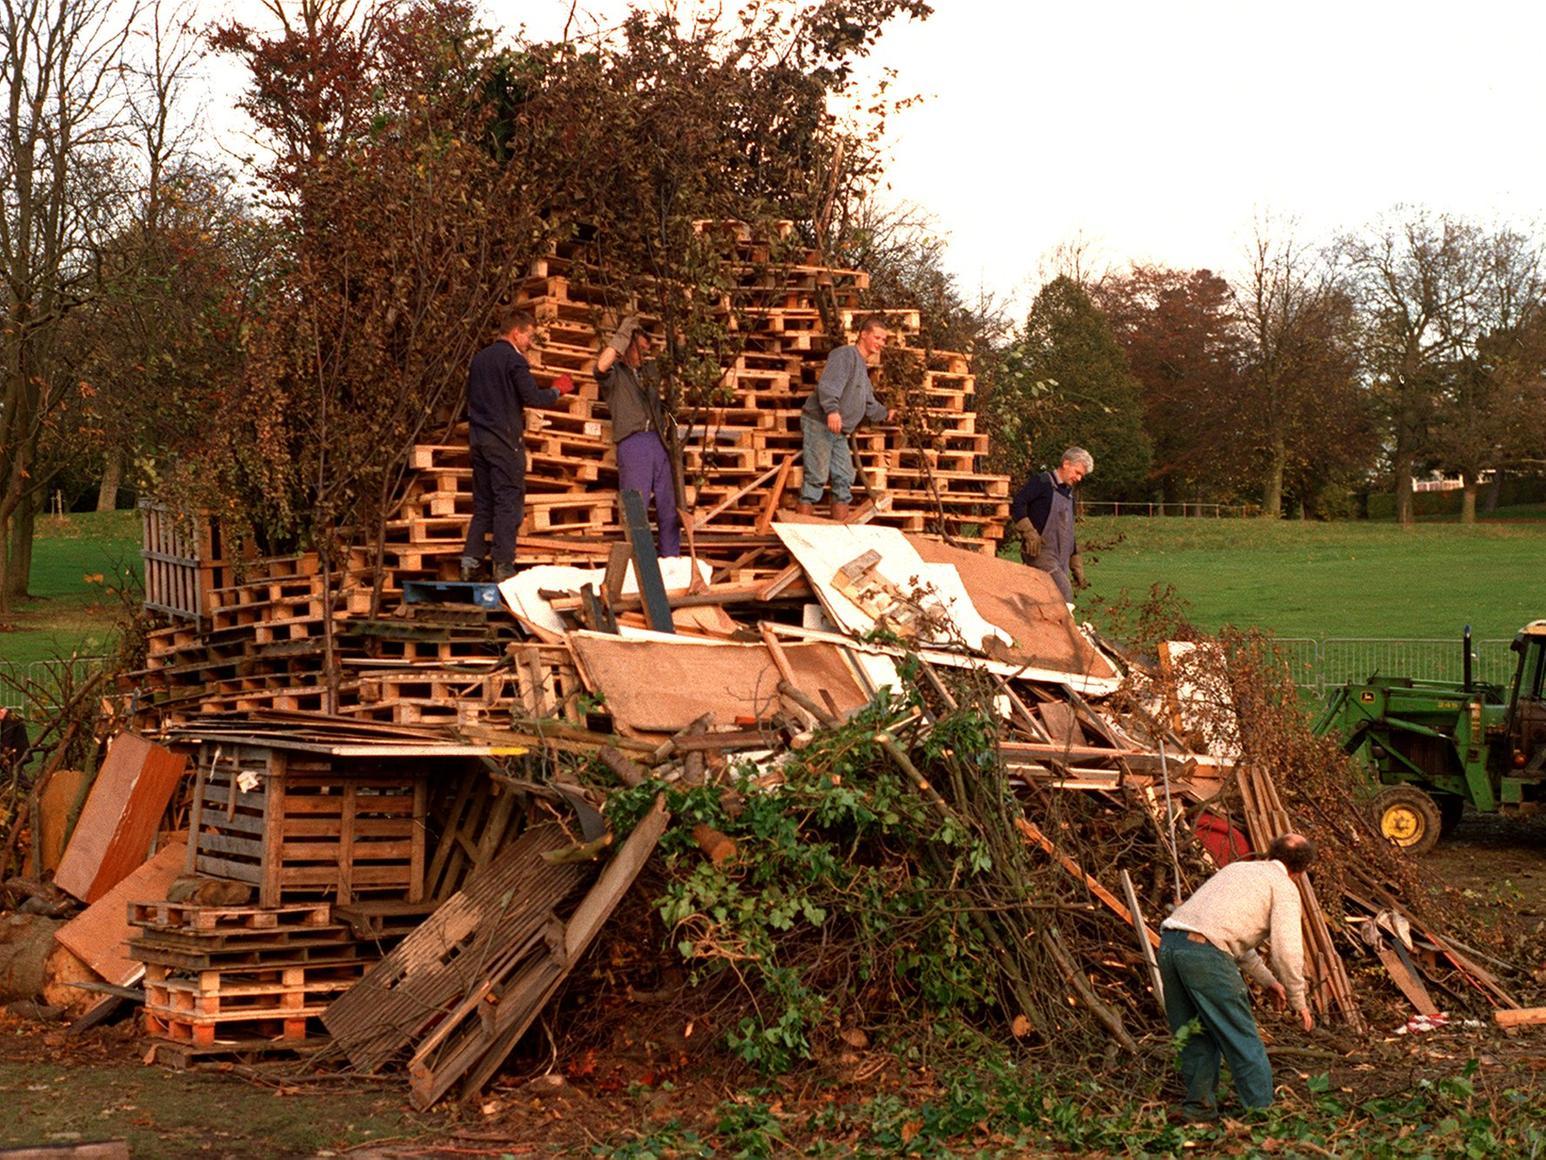 Workers gather the donated wood at Roundhay Park into a bonfire shape.